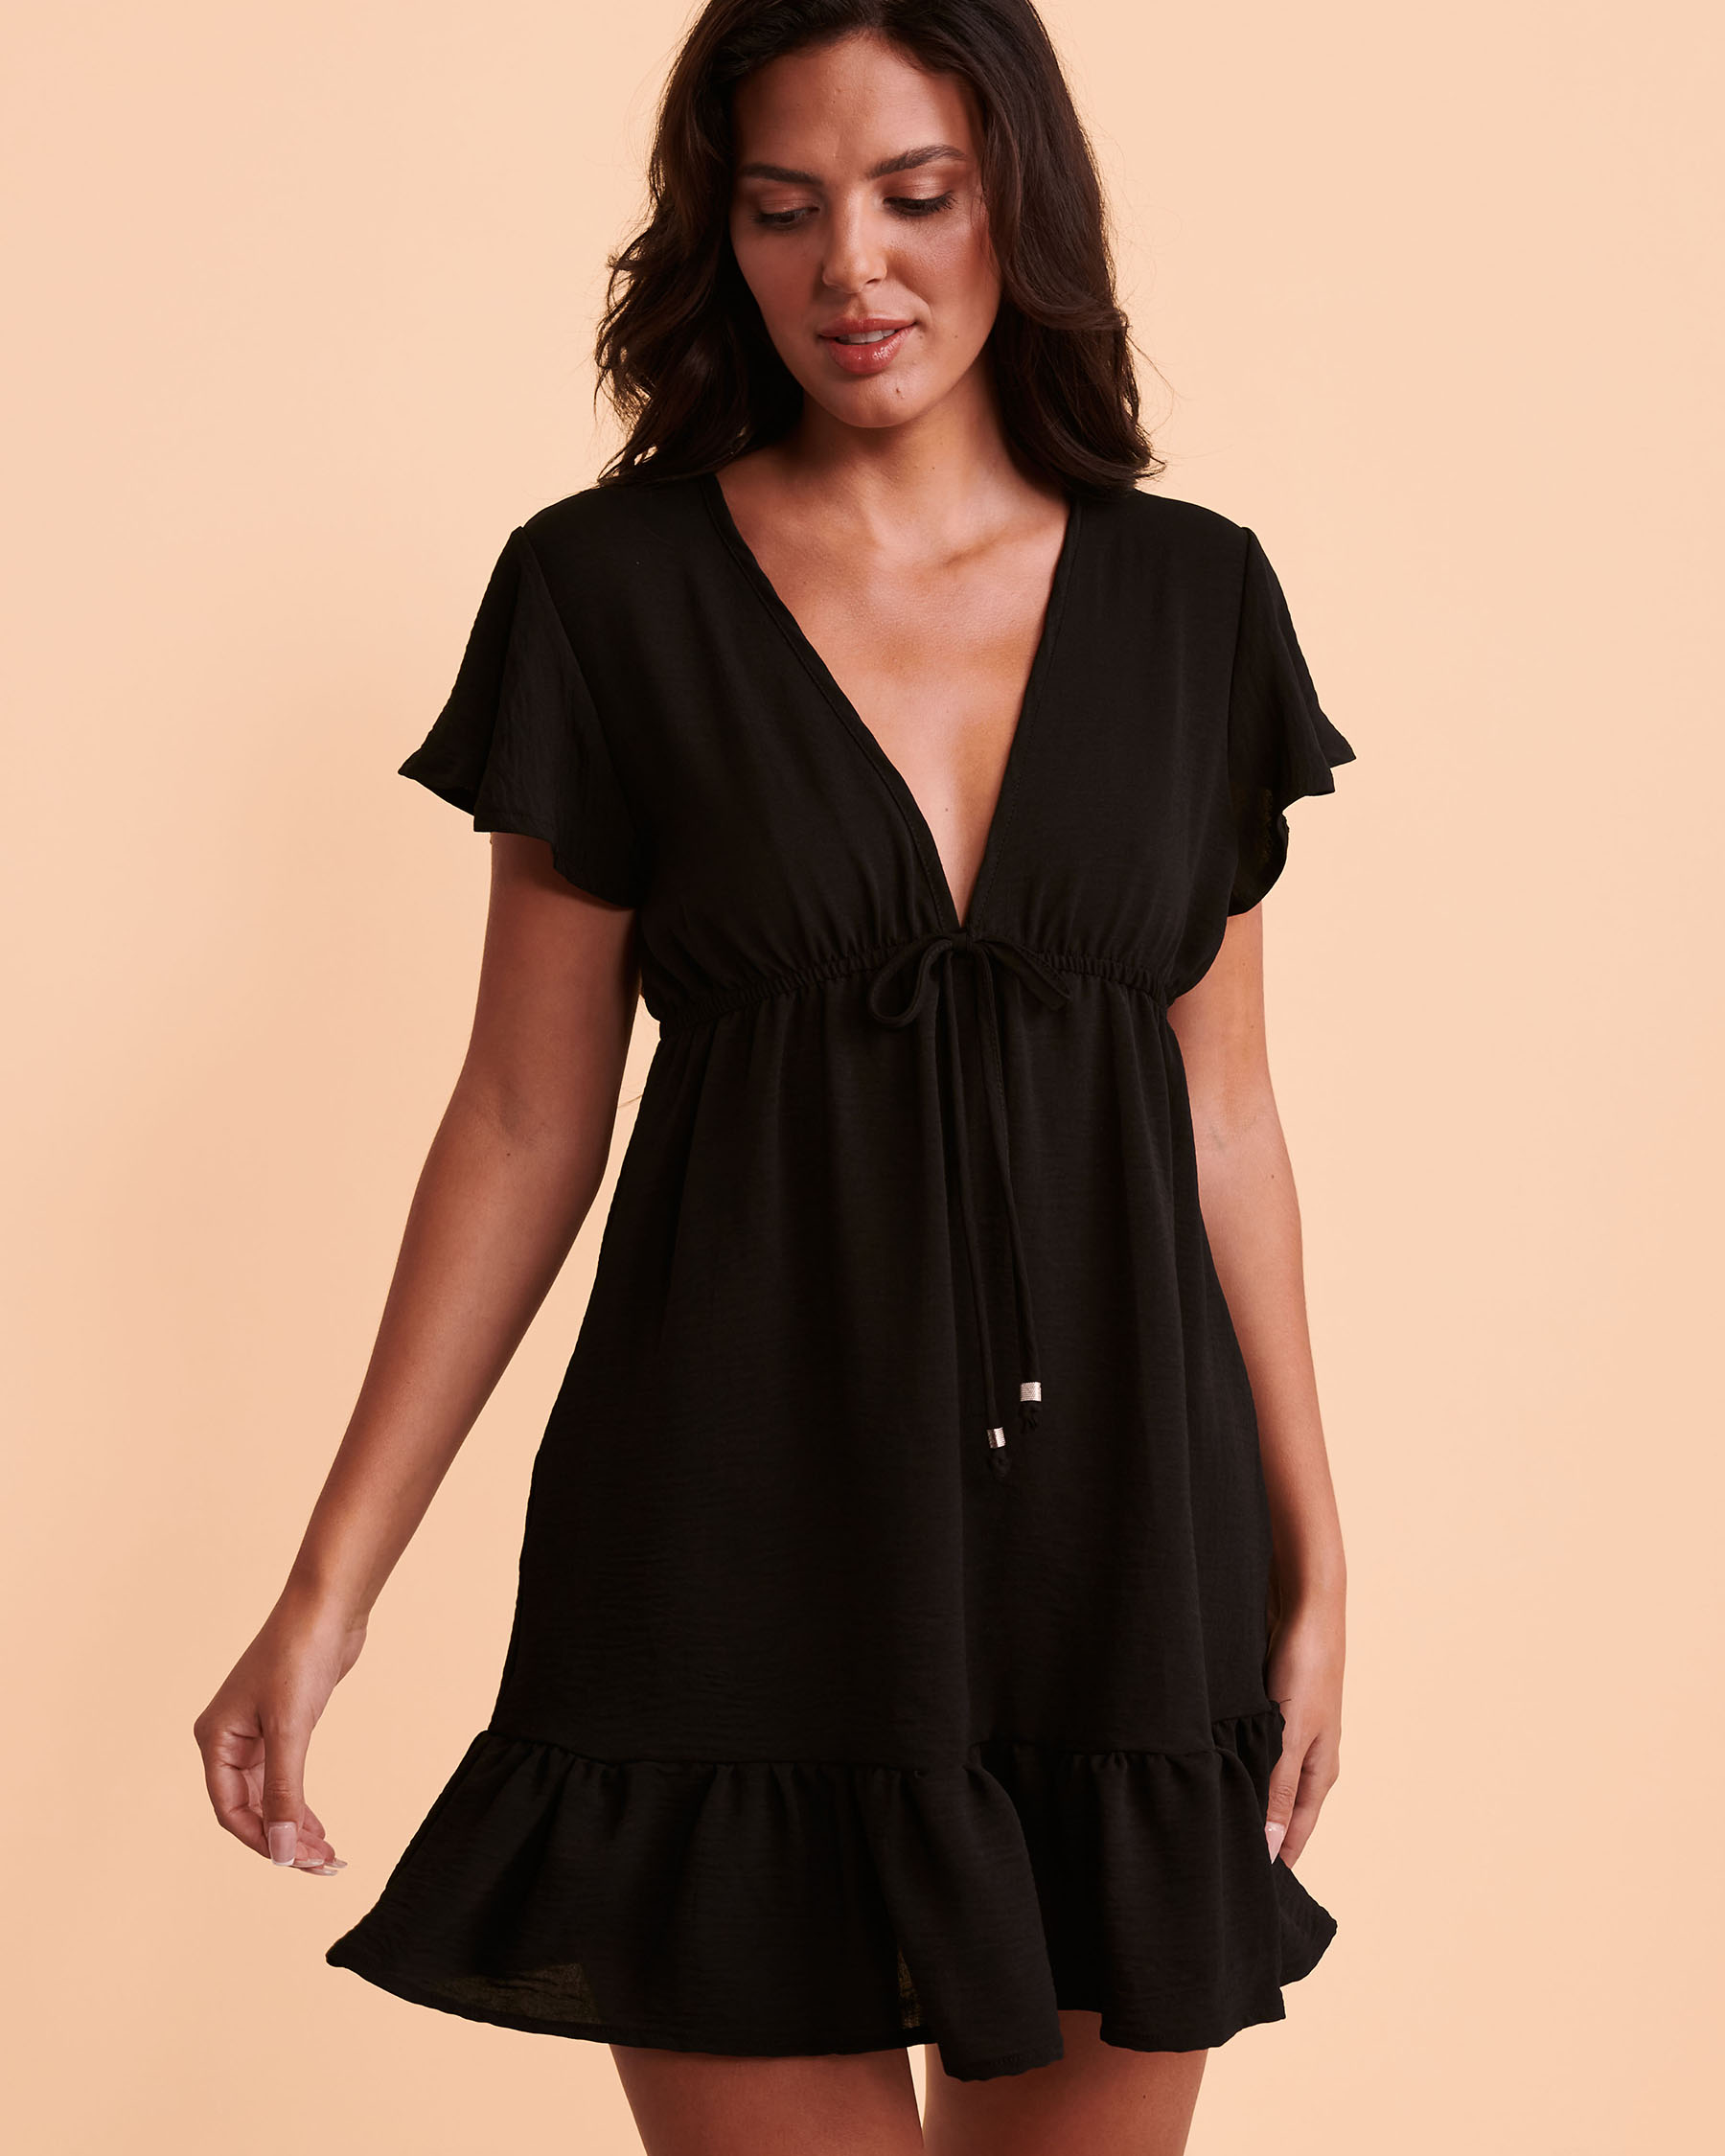 COVER ME Short Sleeves Airflow Dress Black 23022507 - View1